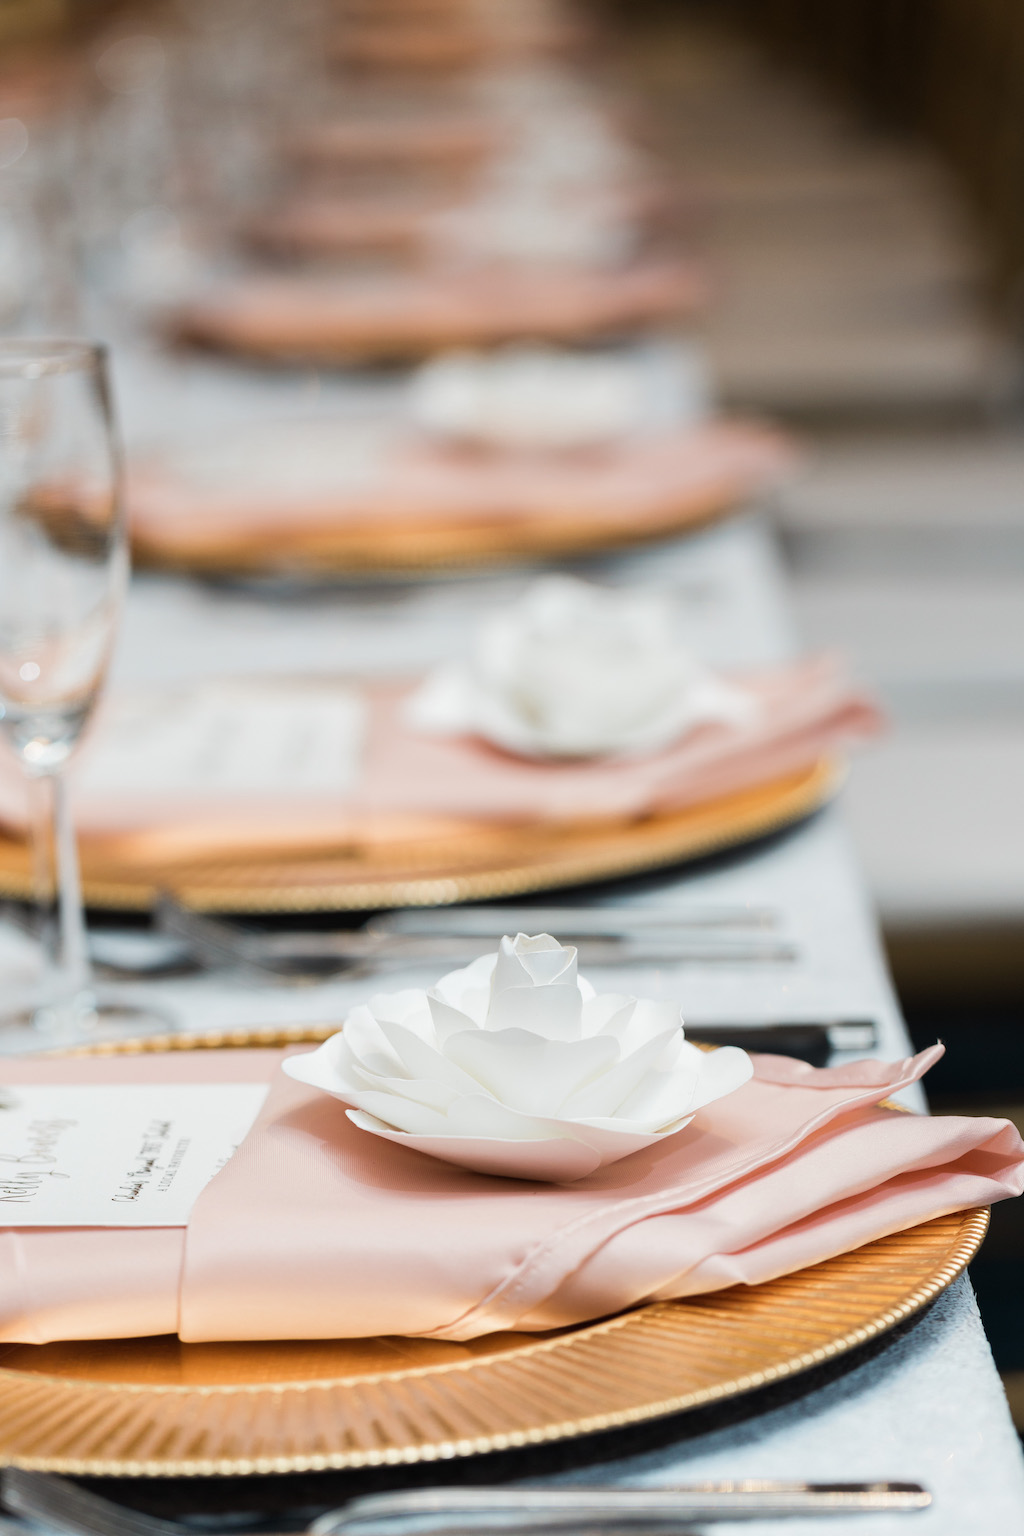 Whimsical Wedding Reception Table Setting with Gold Charger and White Paper Flower, Pink Napkin, and Tropical Gold Foil Printed Menu with Pink Sequin Linen